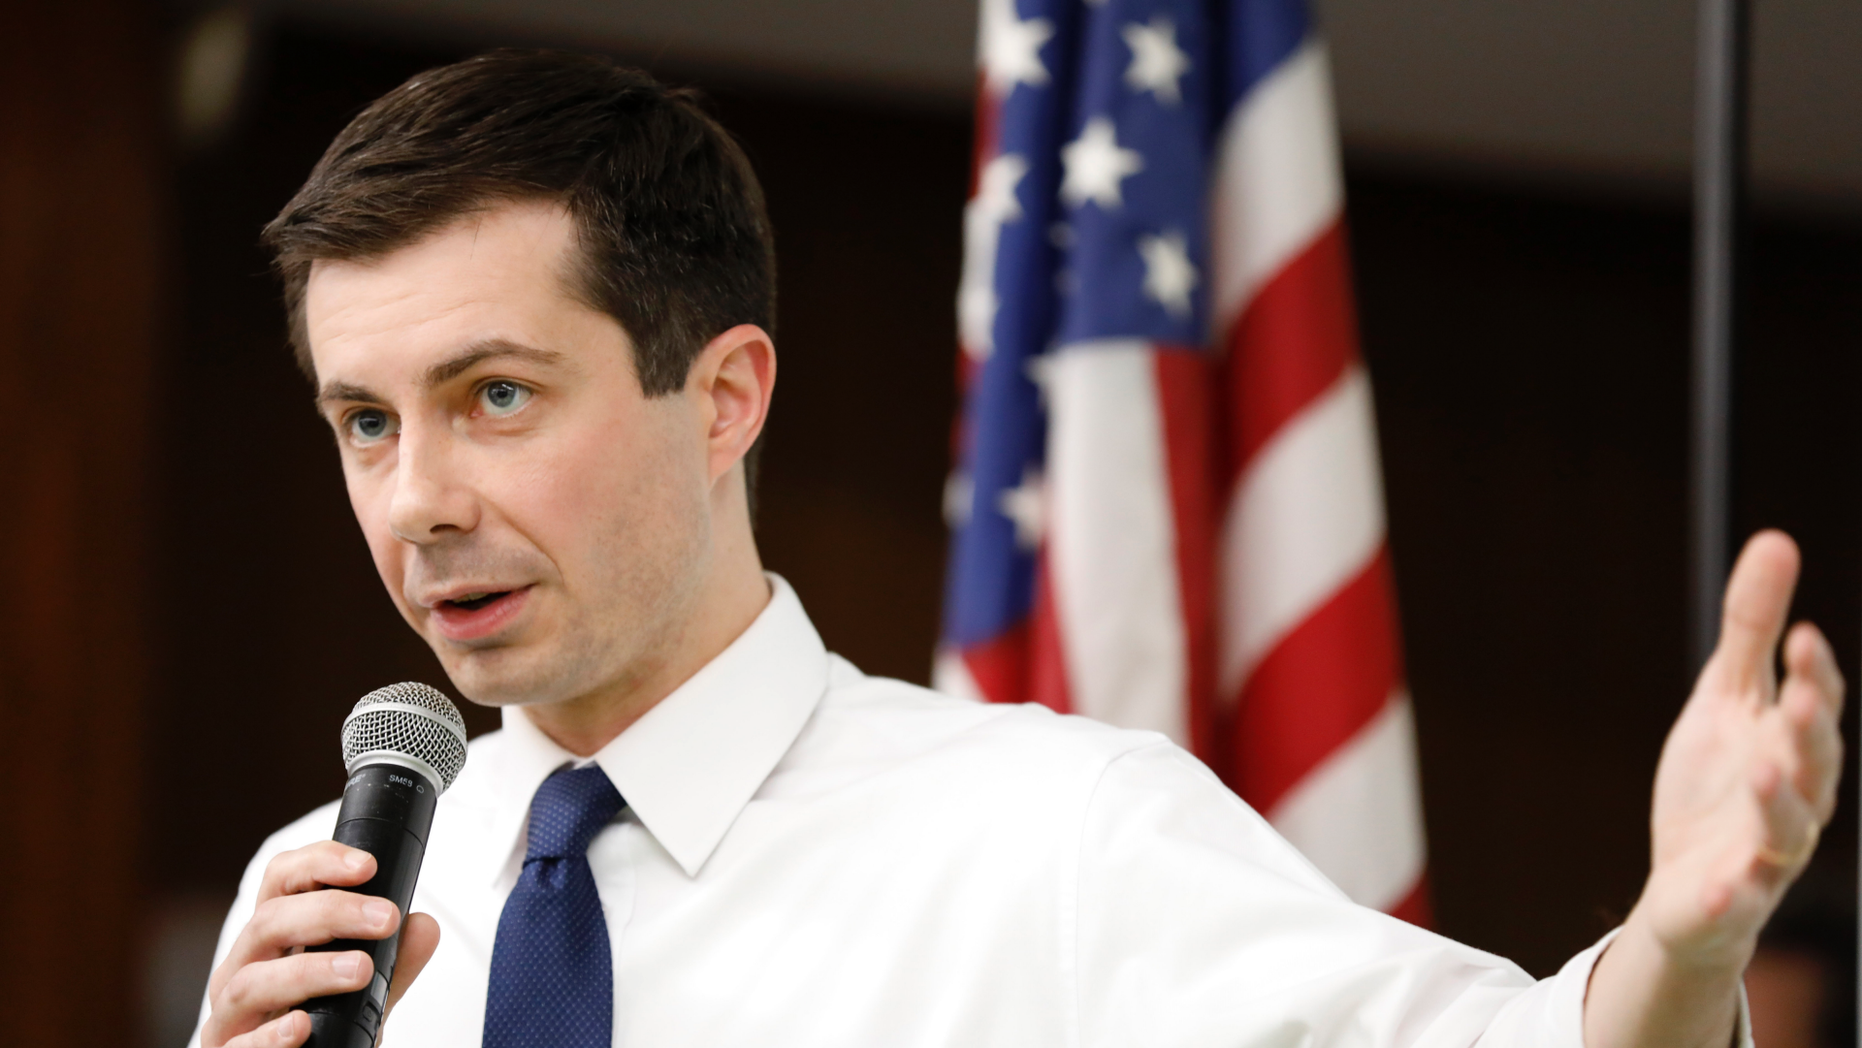 Buttigieg says he's proud of his record as South Bend mayor | Fox News